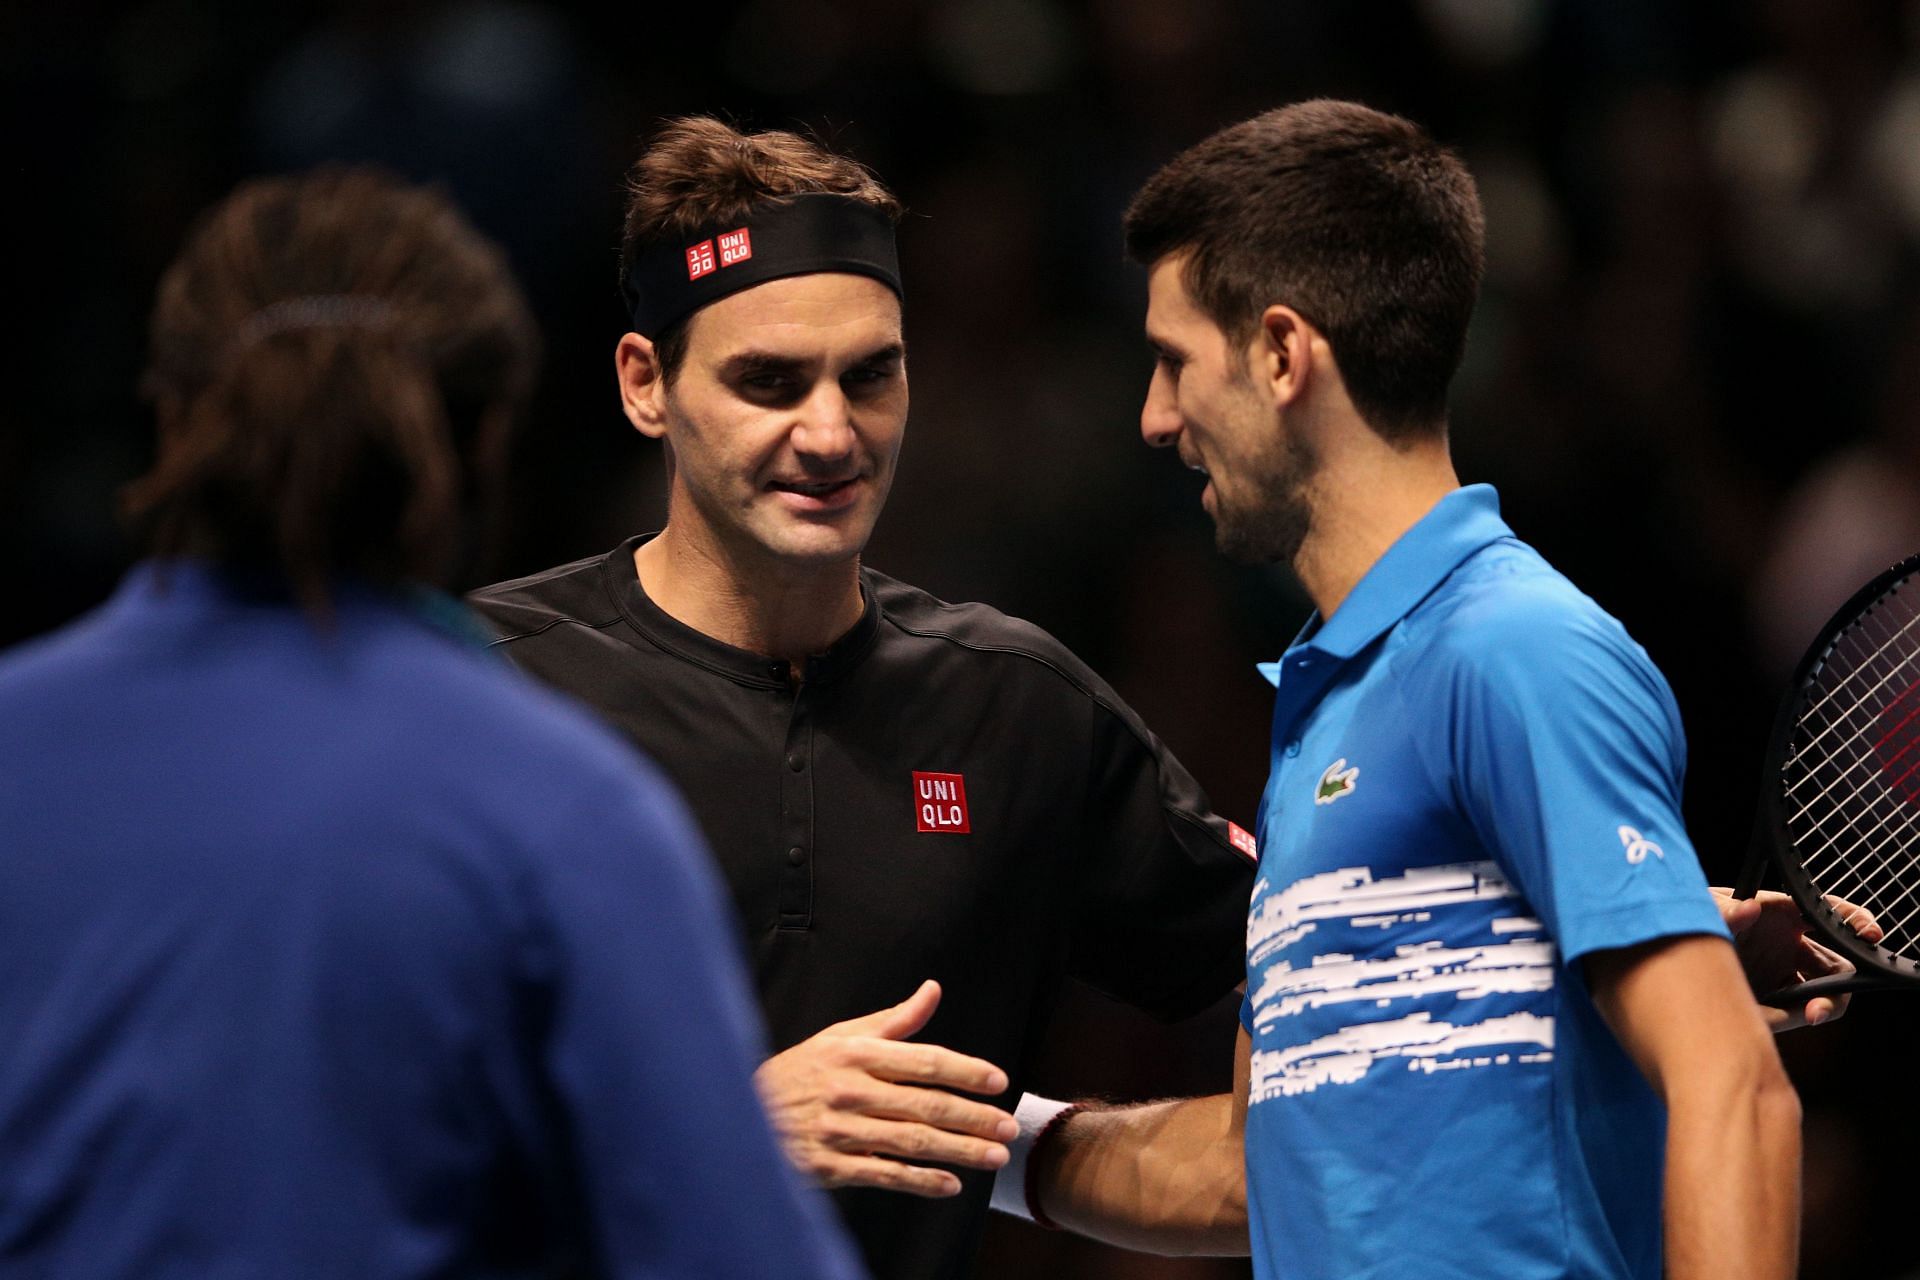 Roger Federer and Novak Djokovic will represent Team Europe at the 2022 Laver Cup.